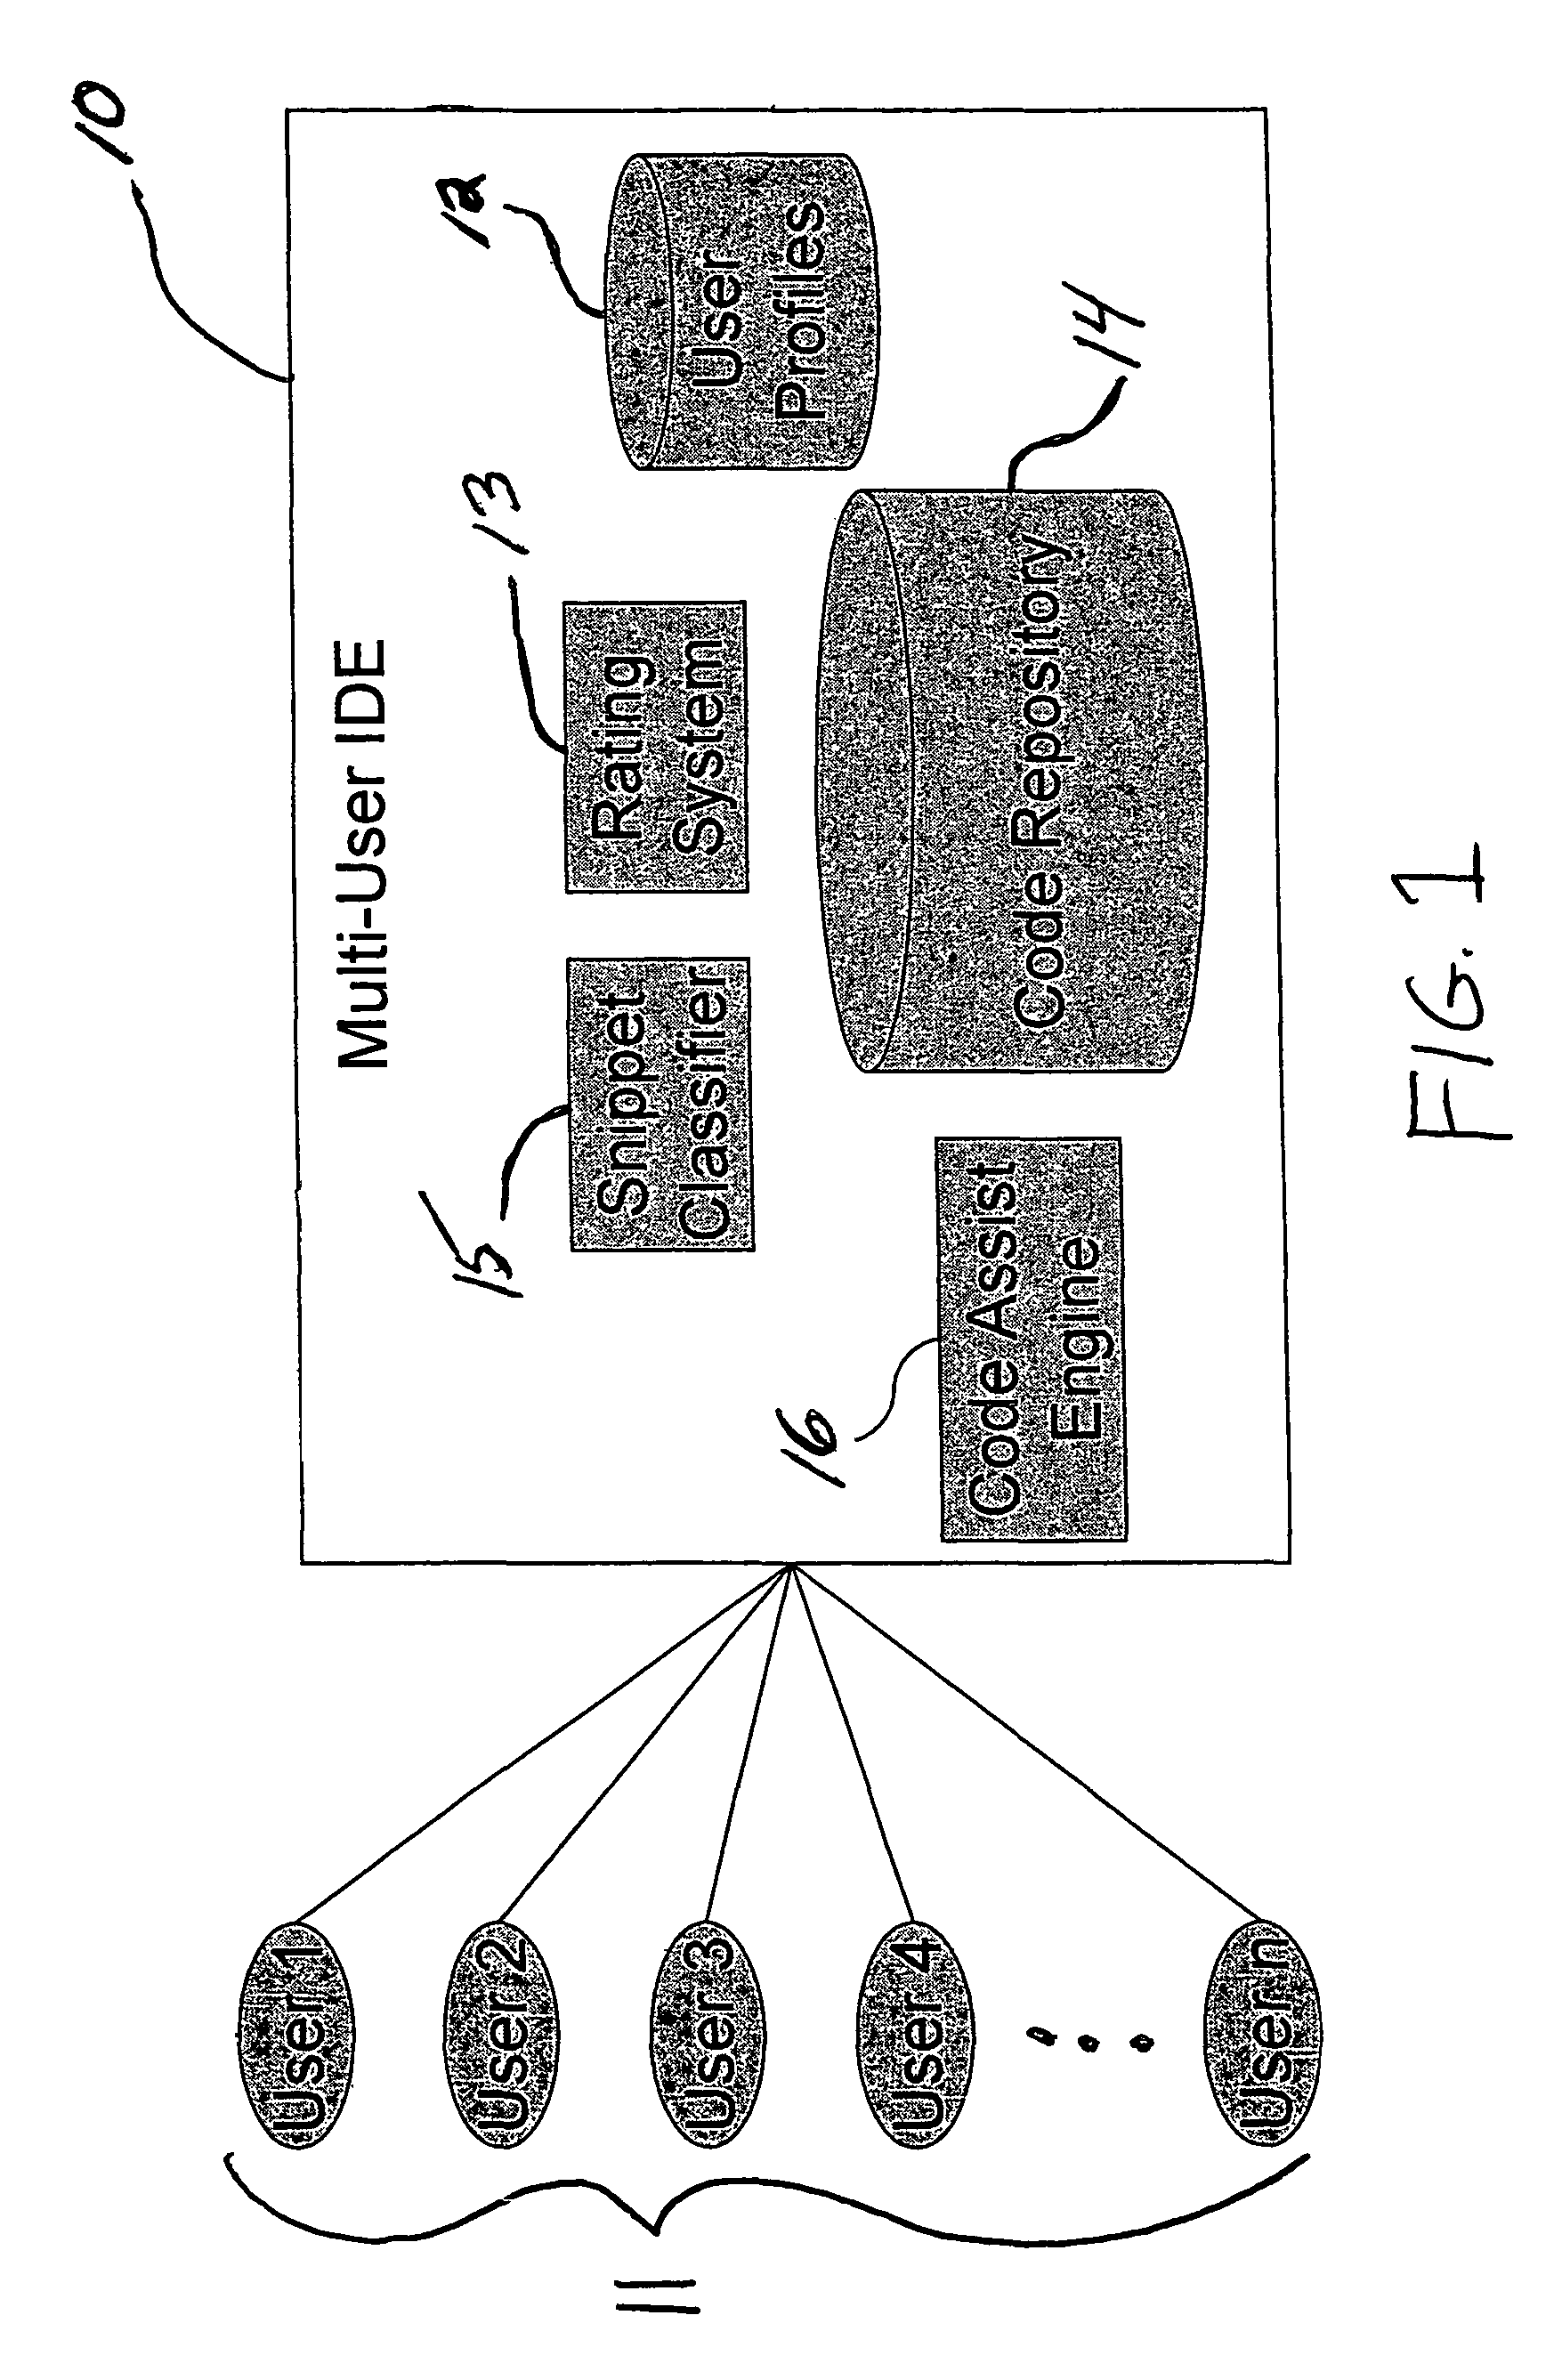 Collaborative software development systems and methods providing automated programming assistance